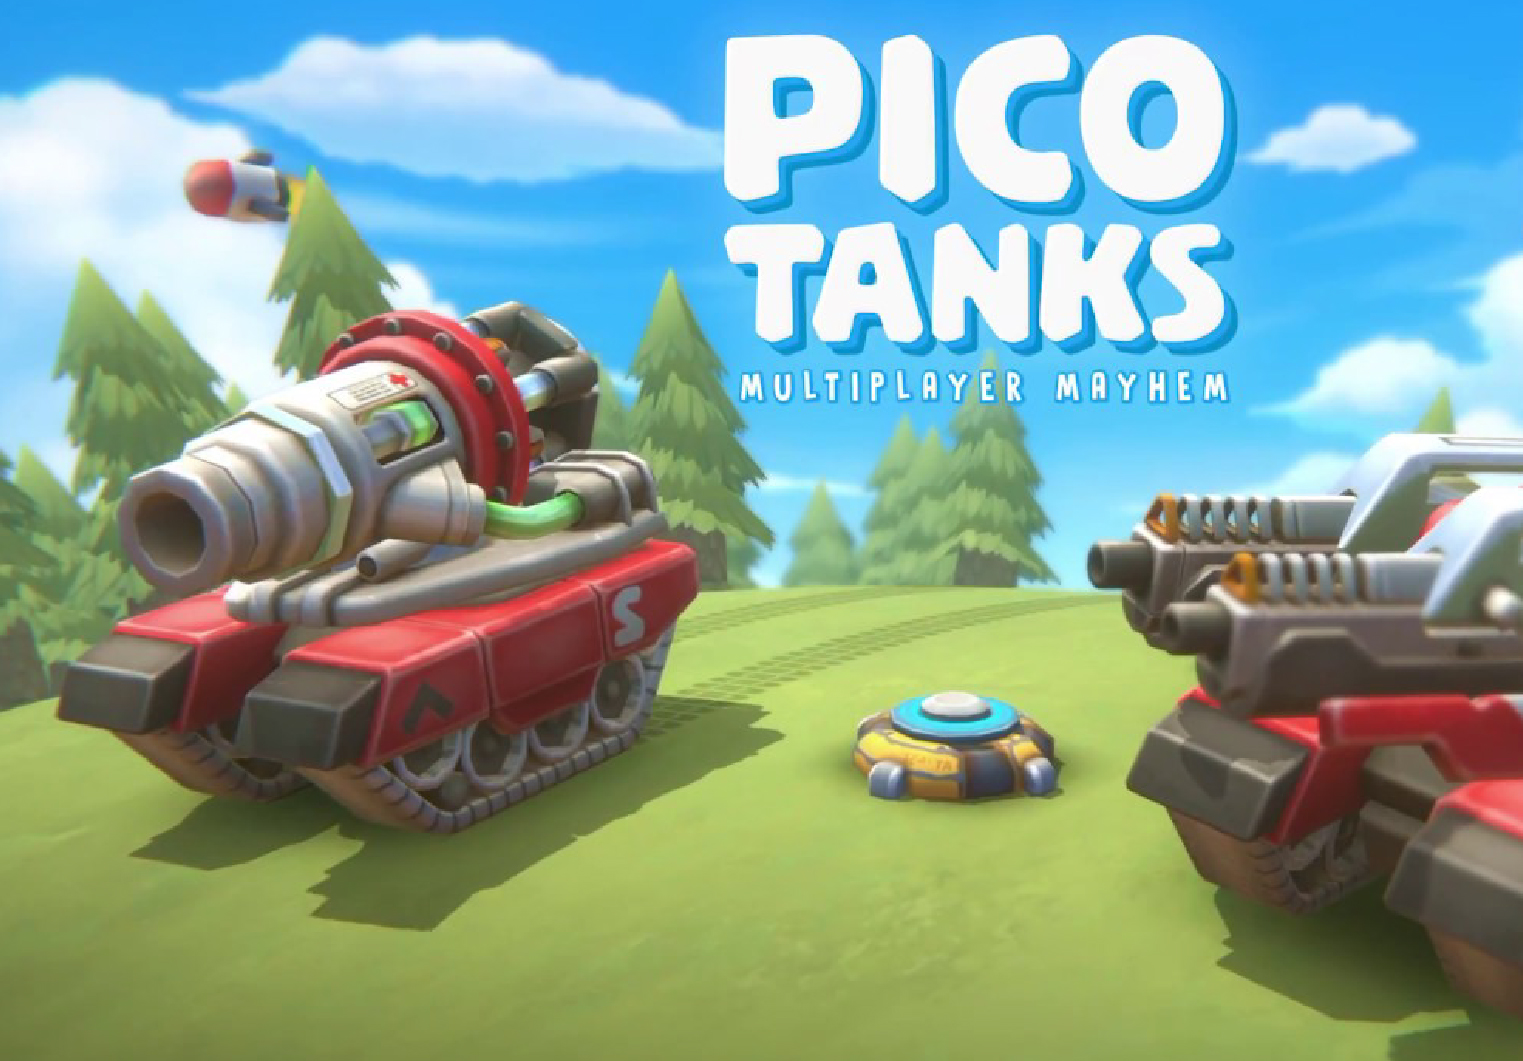 Power Up Your Weaponry with Pico Tanks, an Action-Packed Tank Brawler Game!